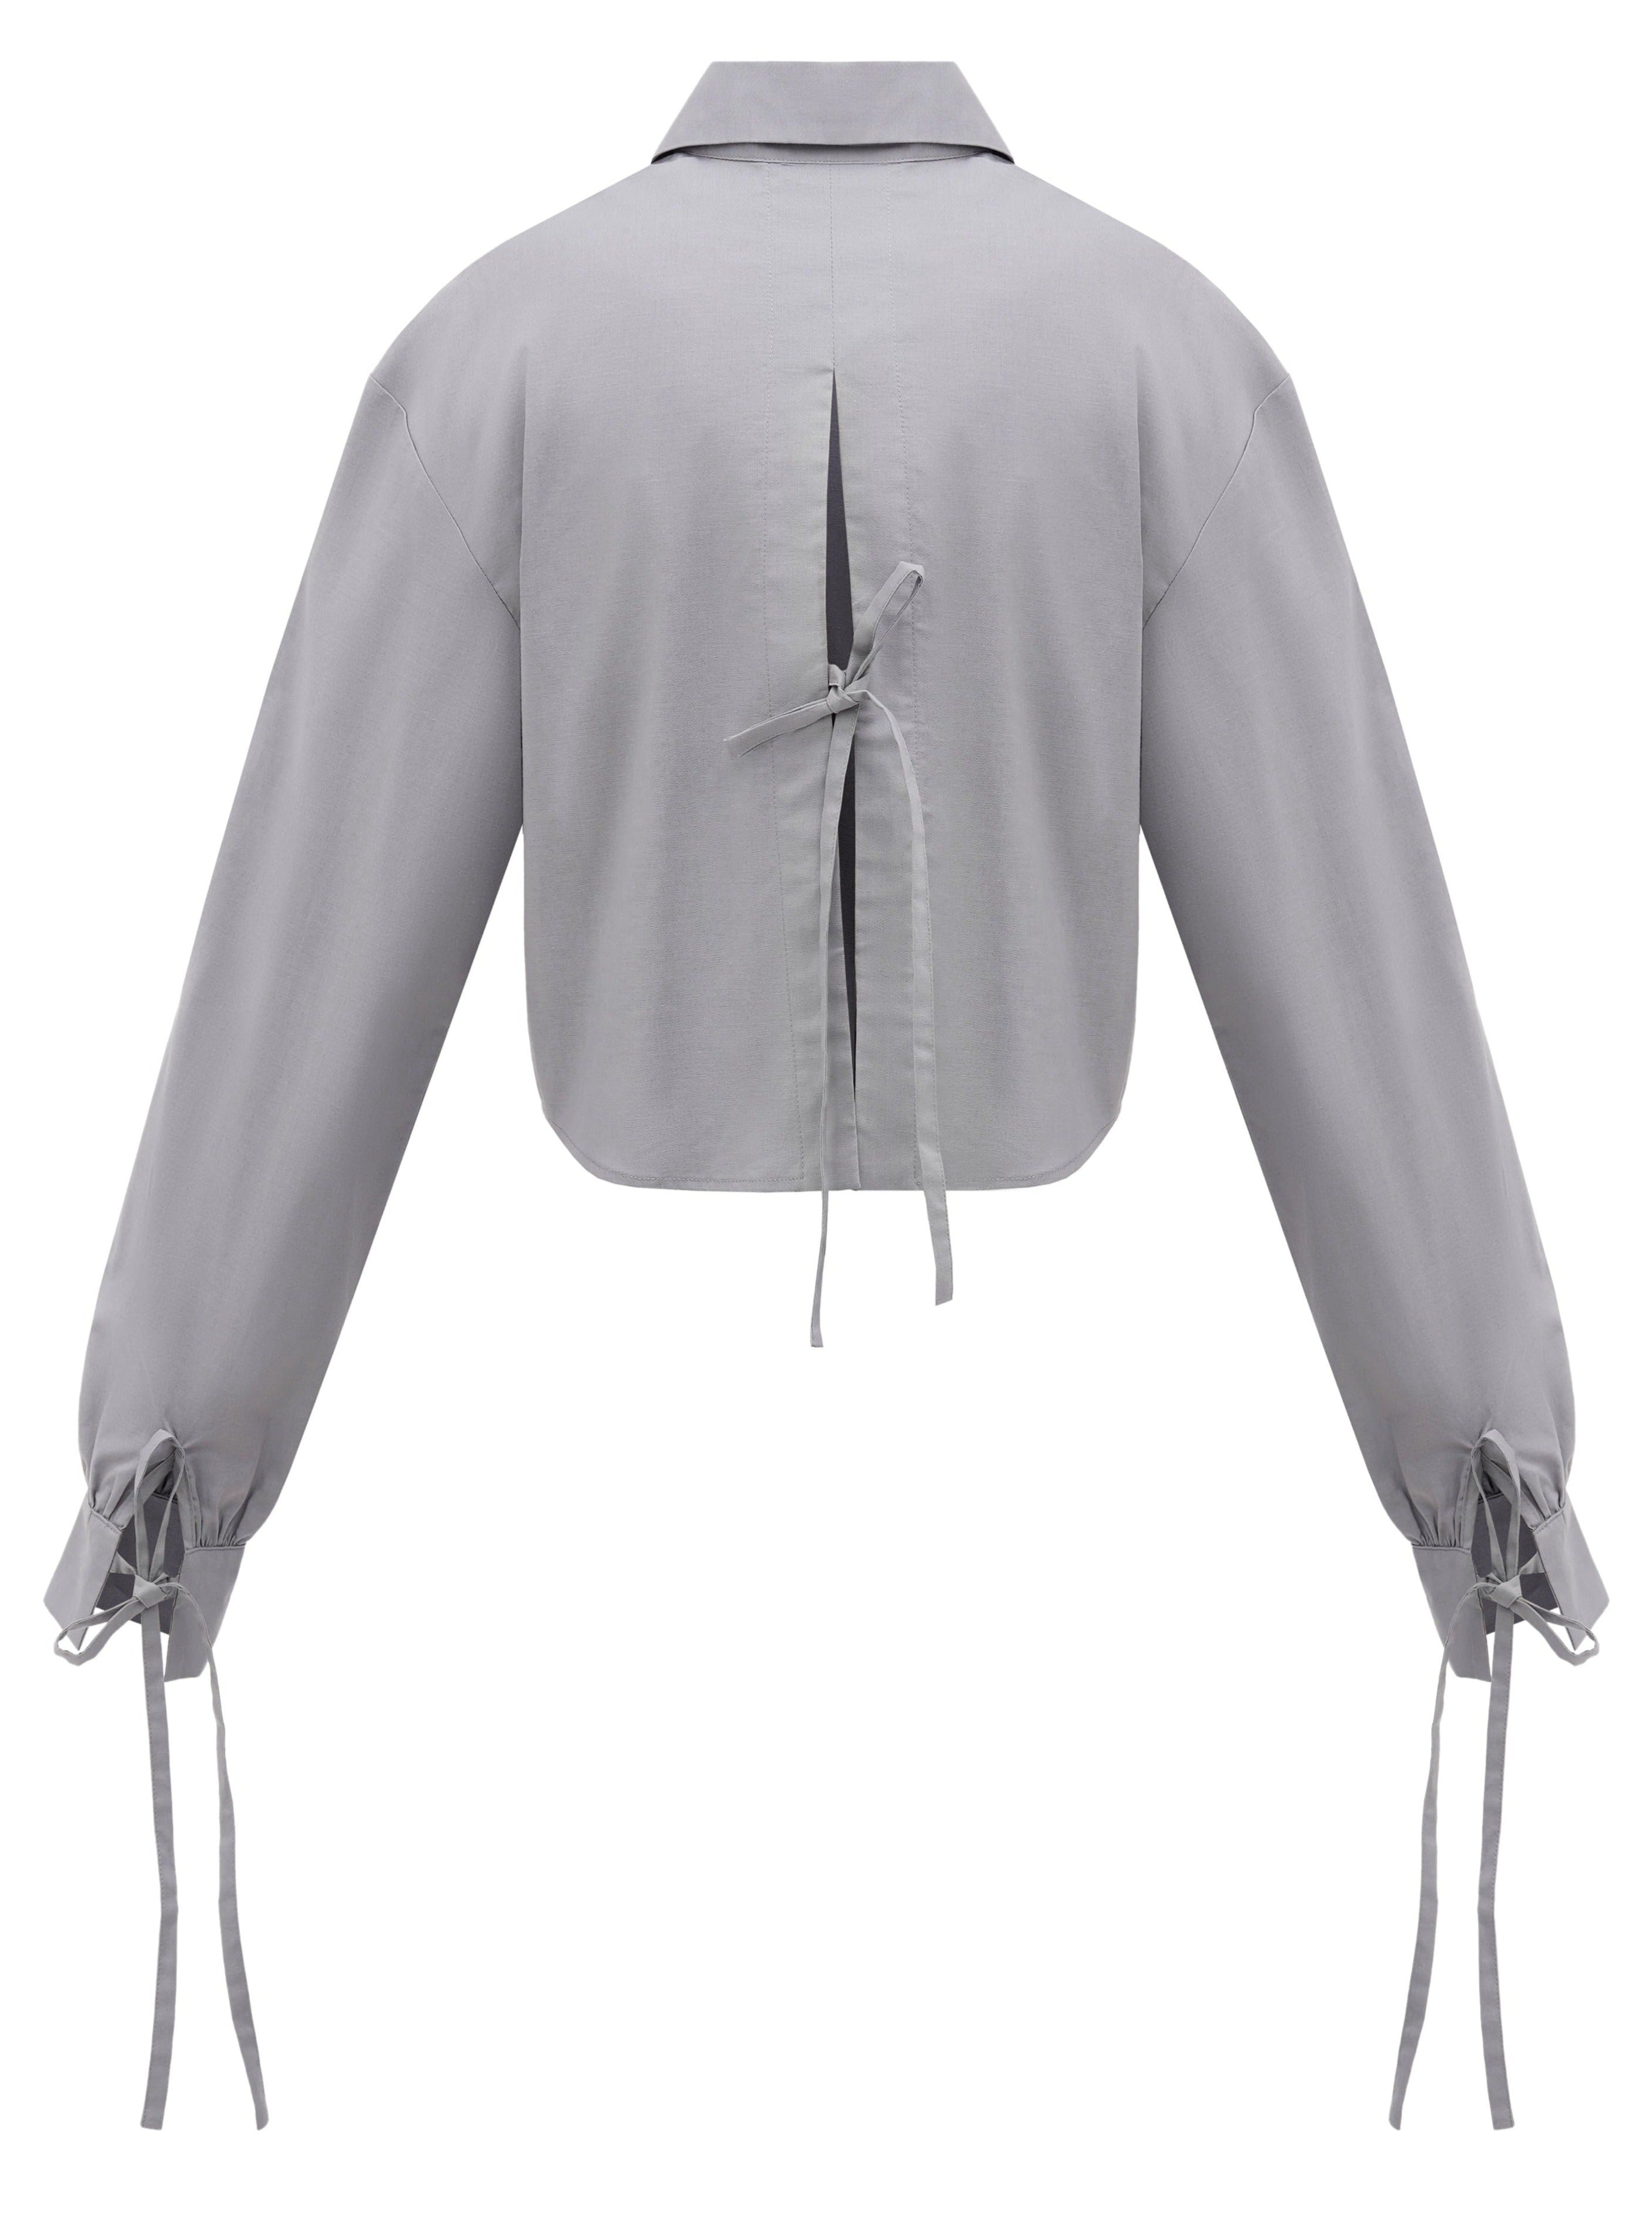 A back of a sustainable organic cotton shirt in grey color with three bow-tie details